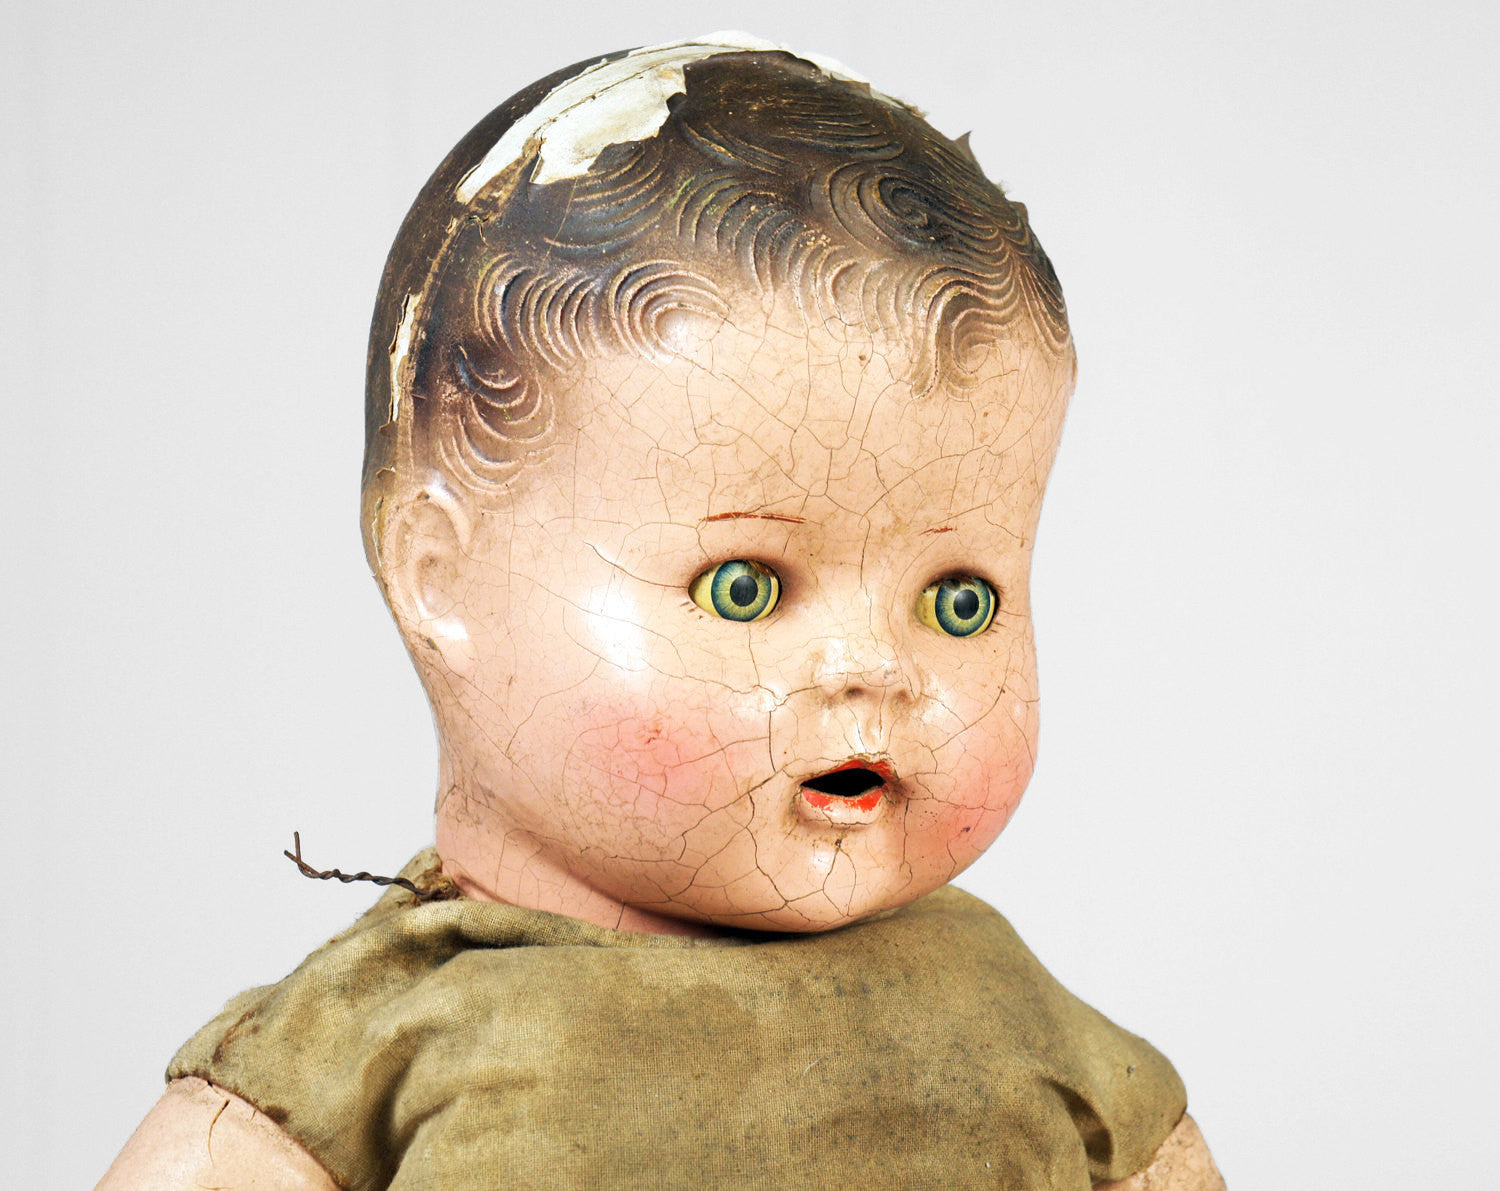 Early 1900's Composition Doll w/ Sleepy Eyes